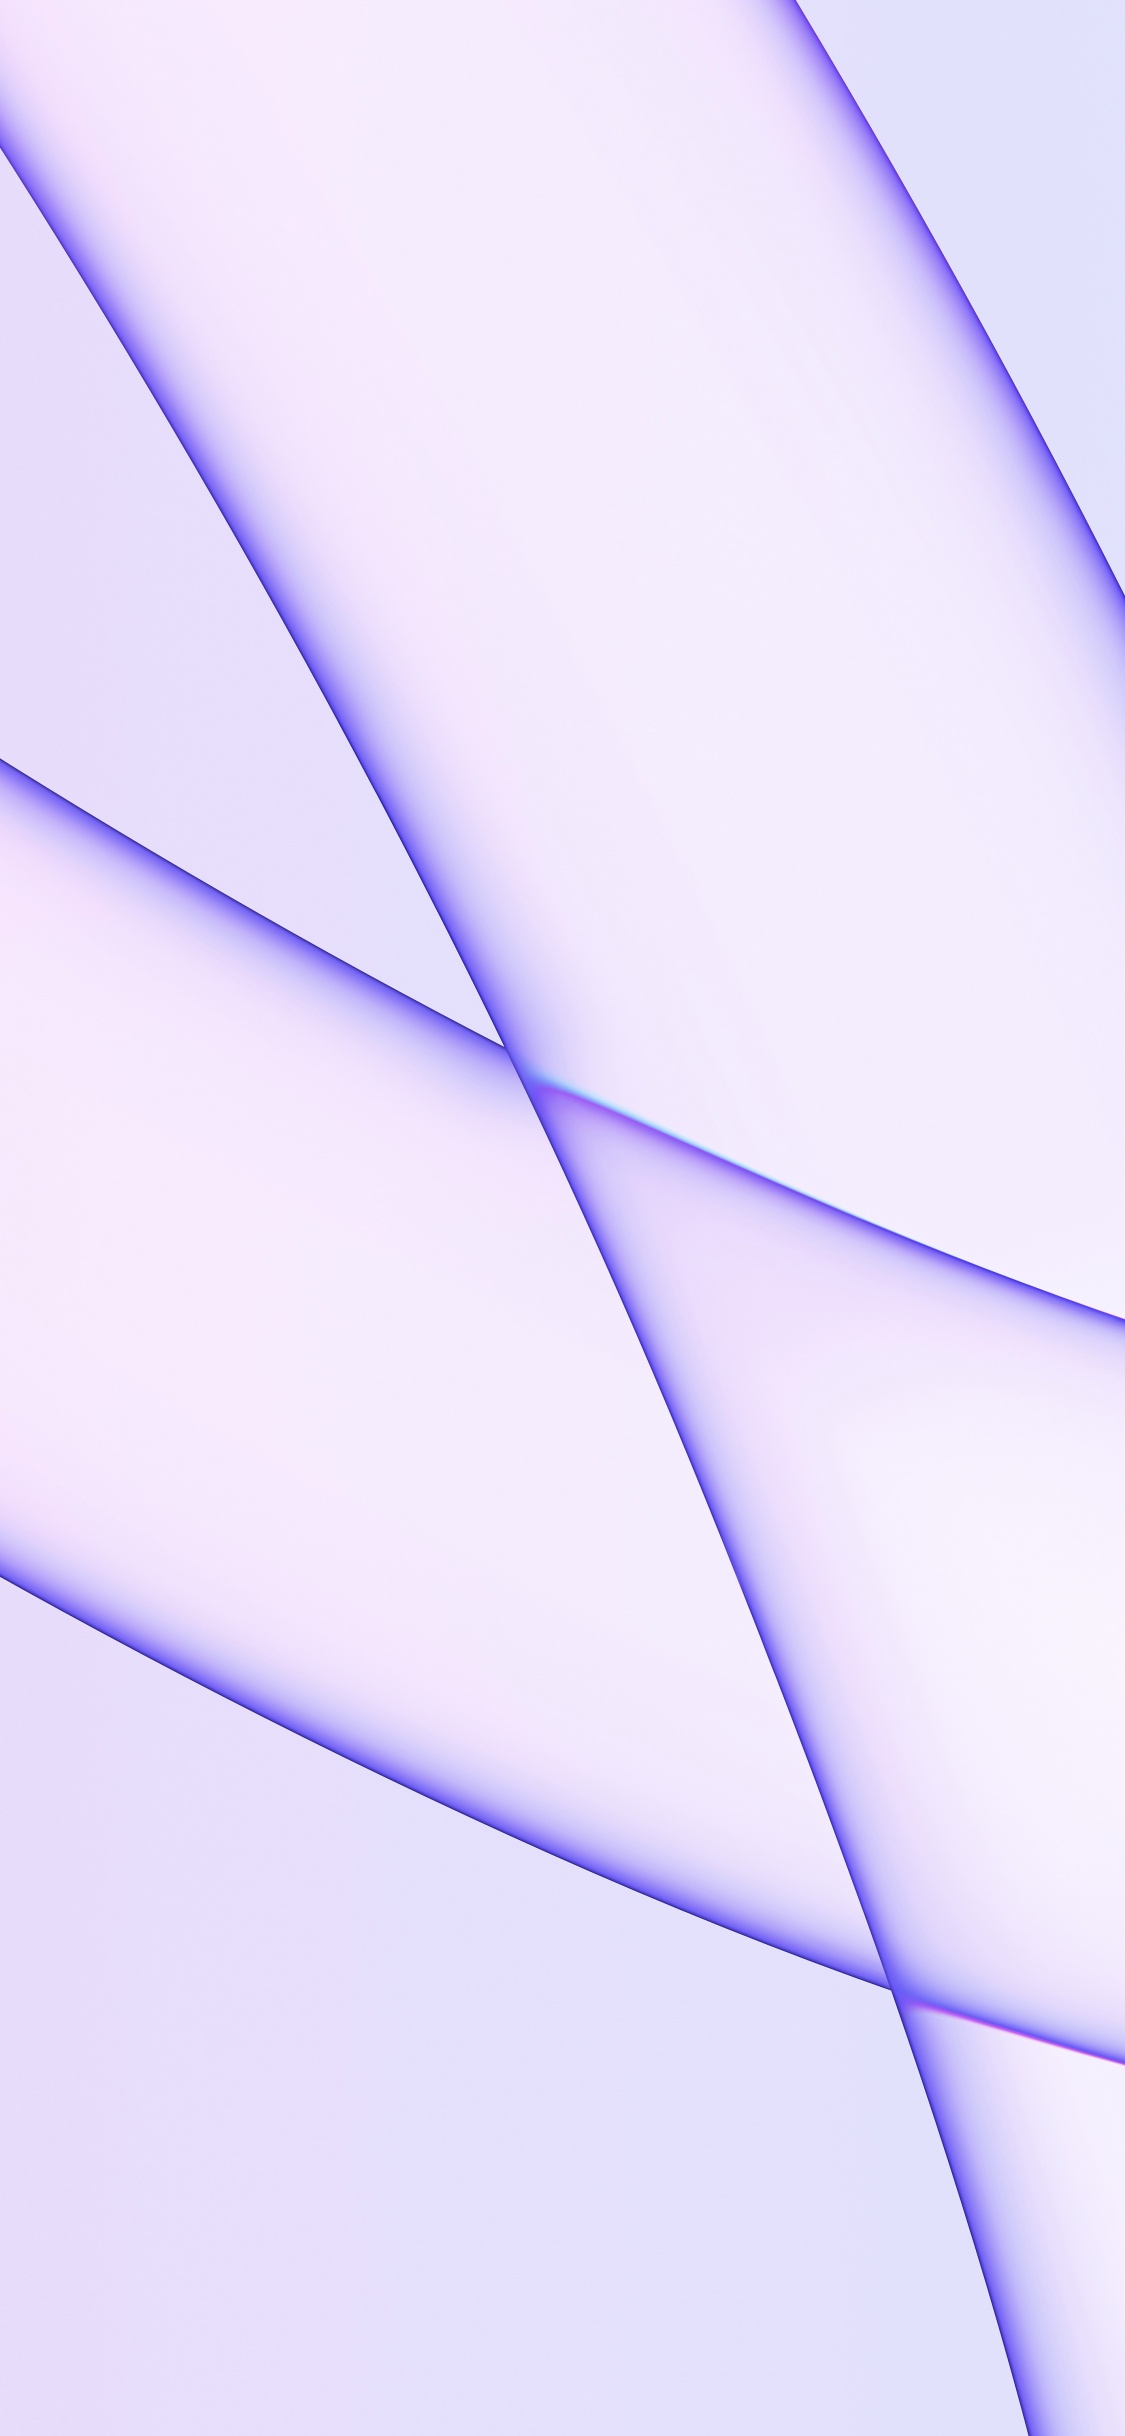 IMac Color Matching Wallpaper in Light Purple for IPad or Desktop. Wallpaper in 1125x2436 Resolution